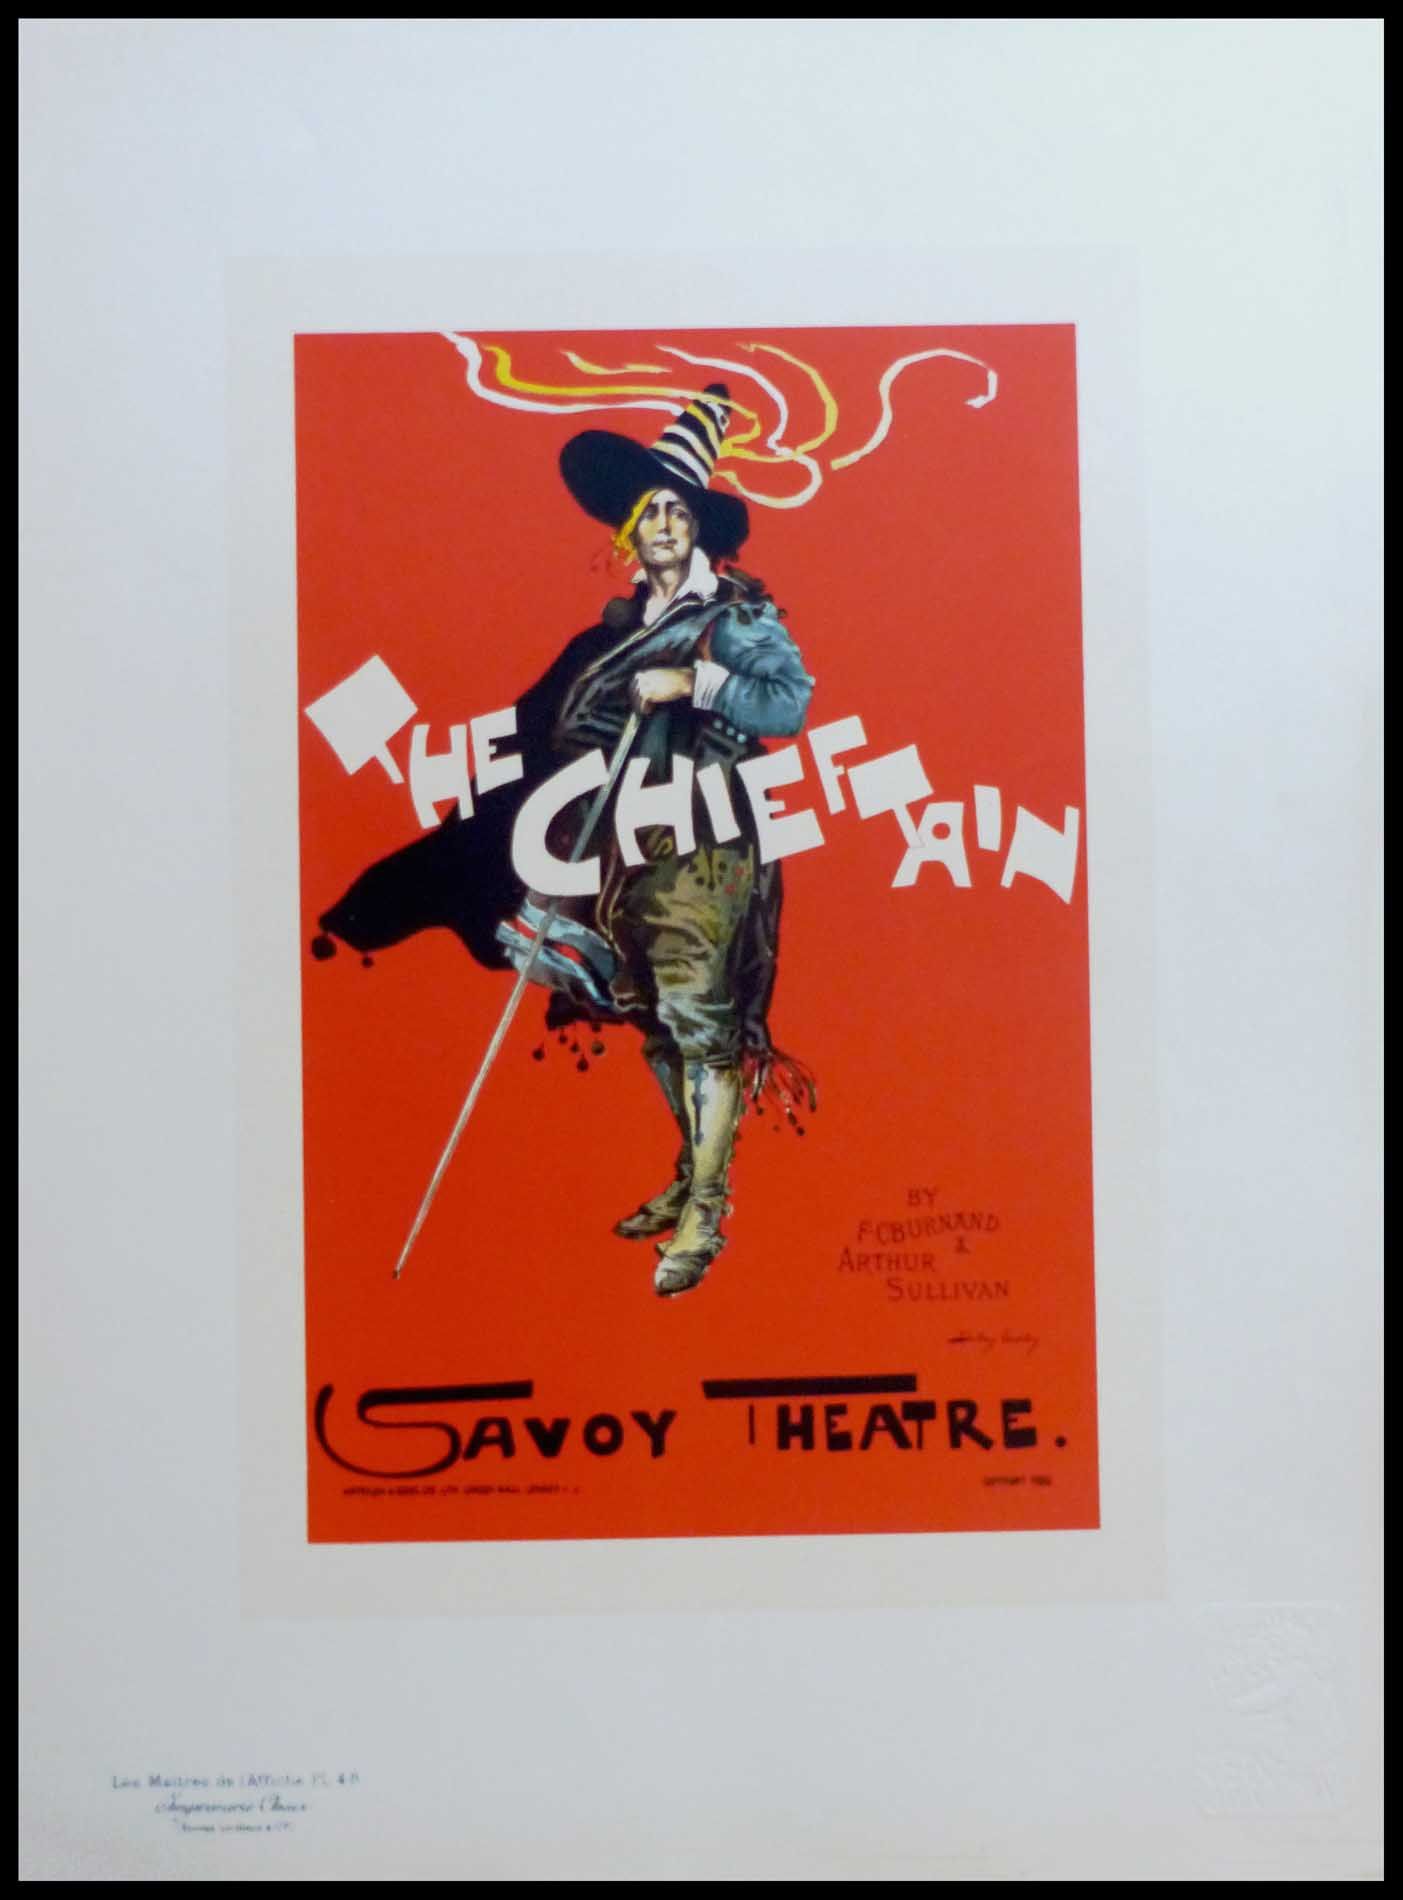 Dudley Hardy Dudley HARDY : (1867 - 1922)

Teatro The Chieftain Savoy

1896

Lit&hellip;